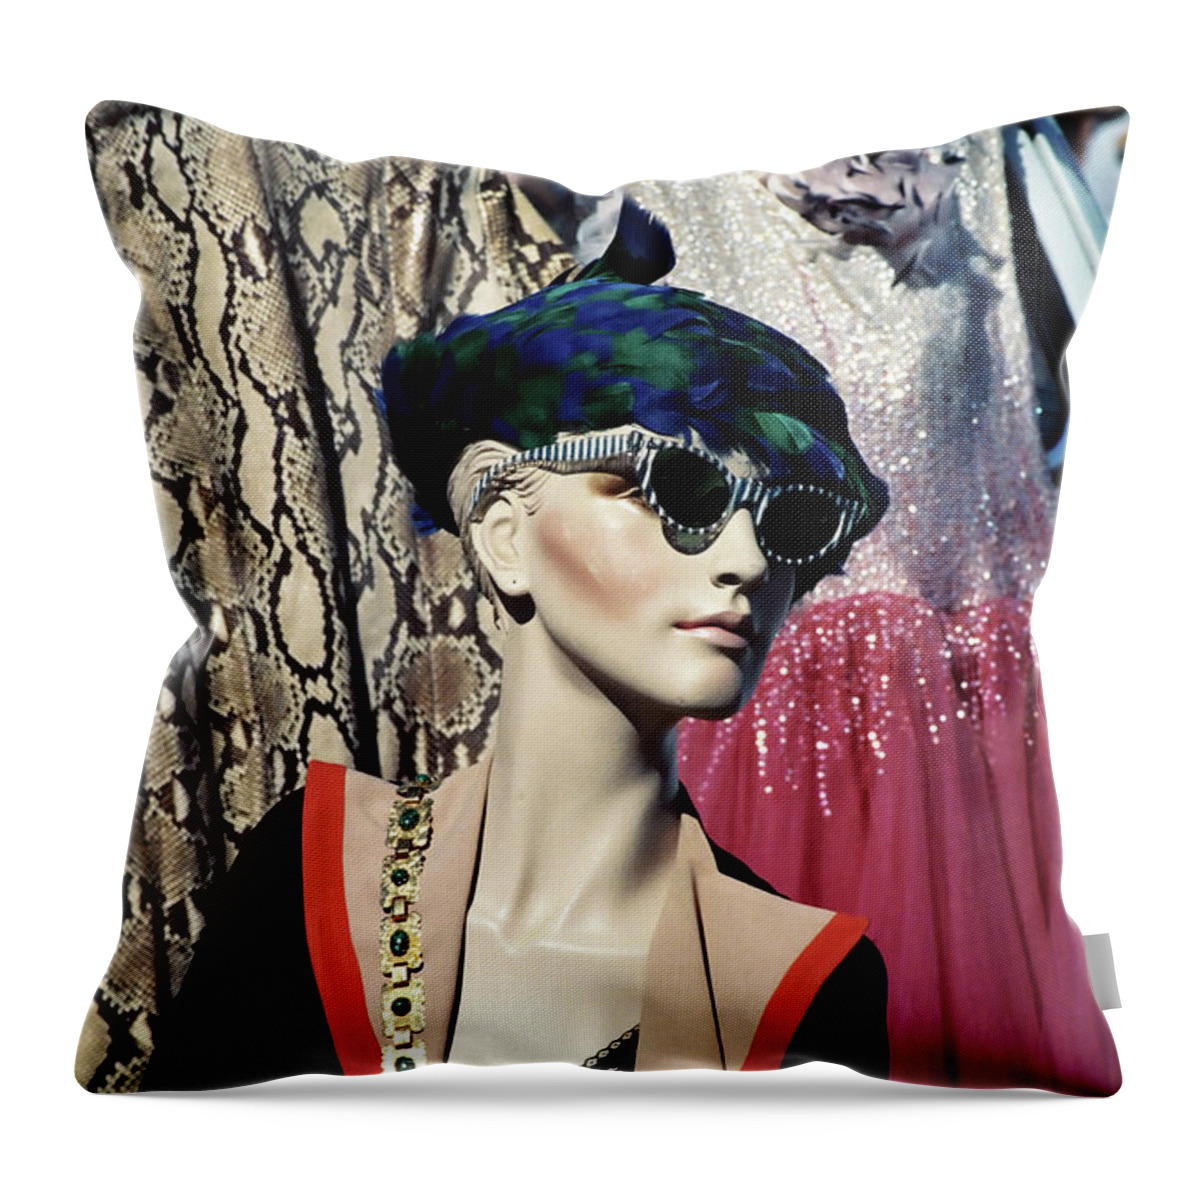 Flea Market Throw Pillow featuring the photograph Flea Market Style by Frank DiMarco